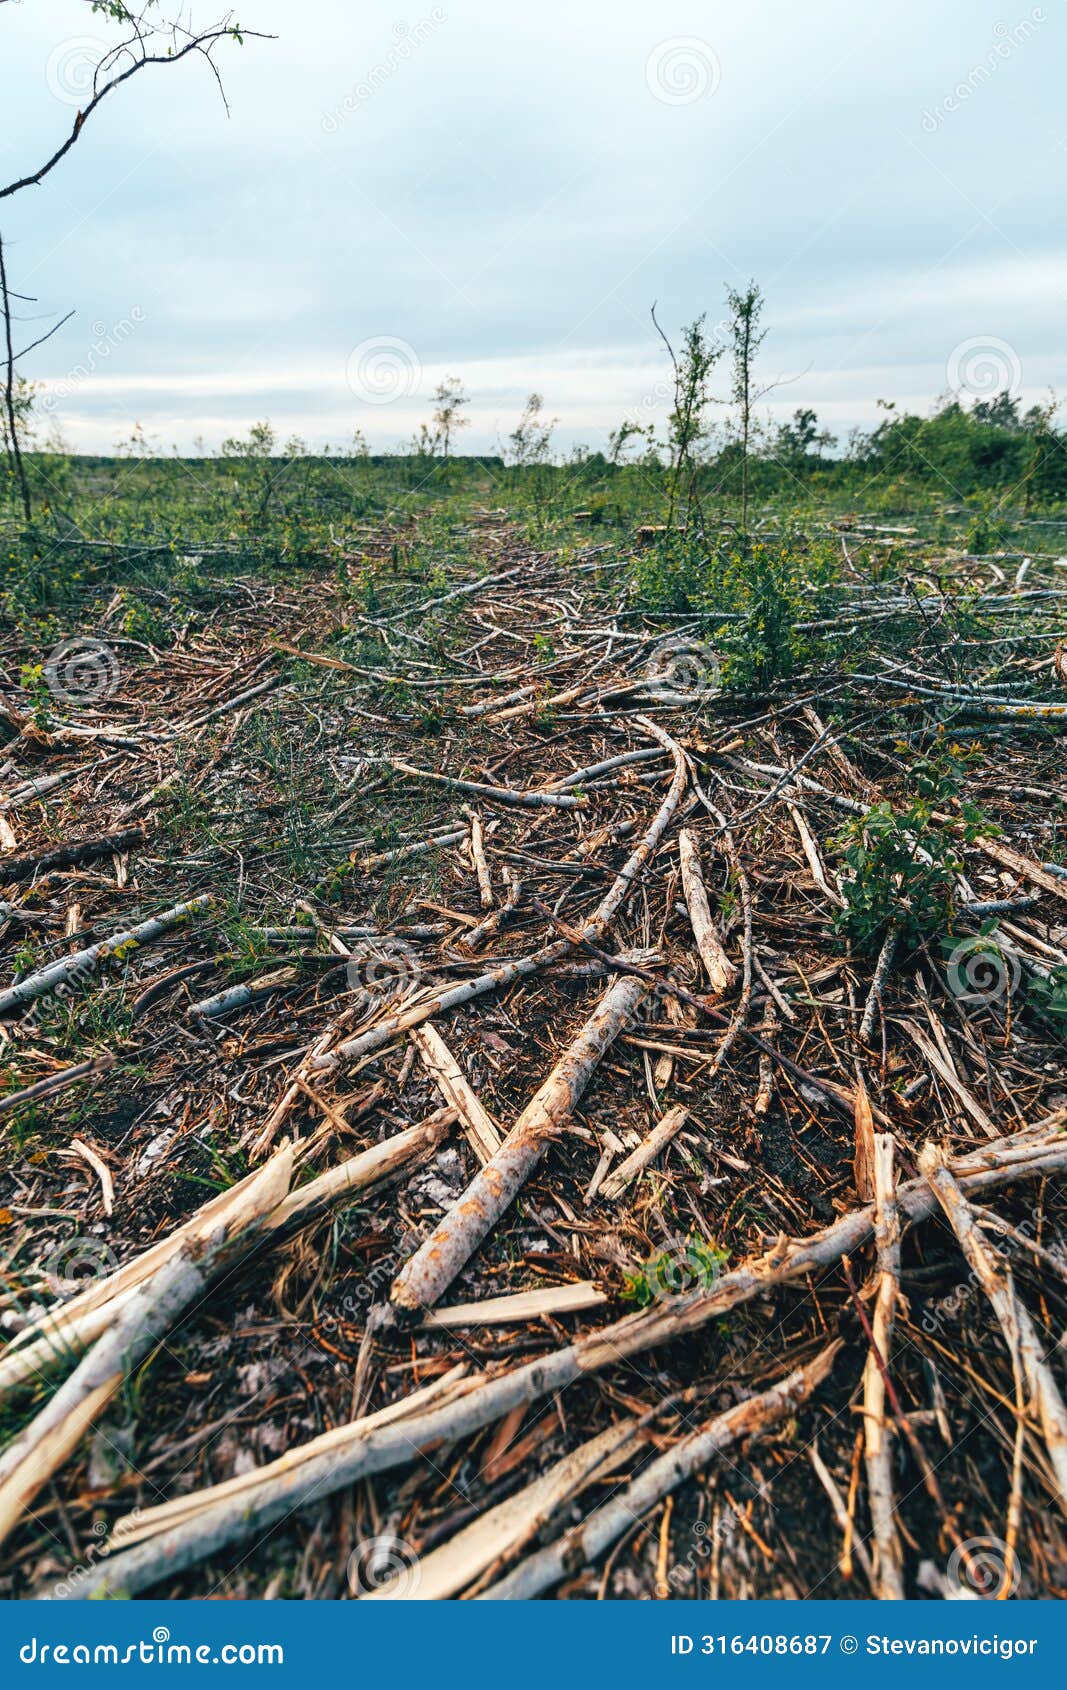 deforestation site, vast landscape of former forest with tree stumps and branches after cutting down trees